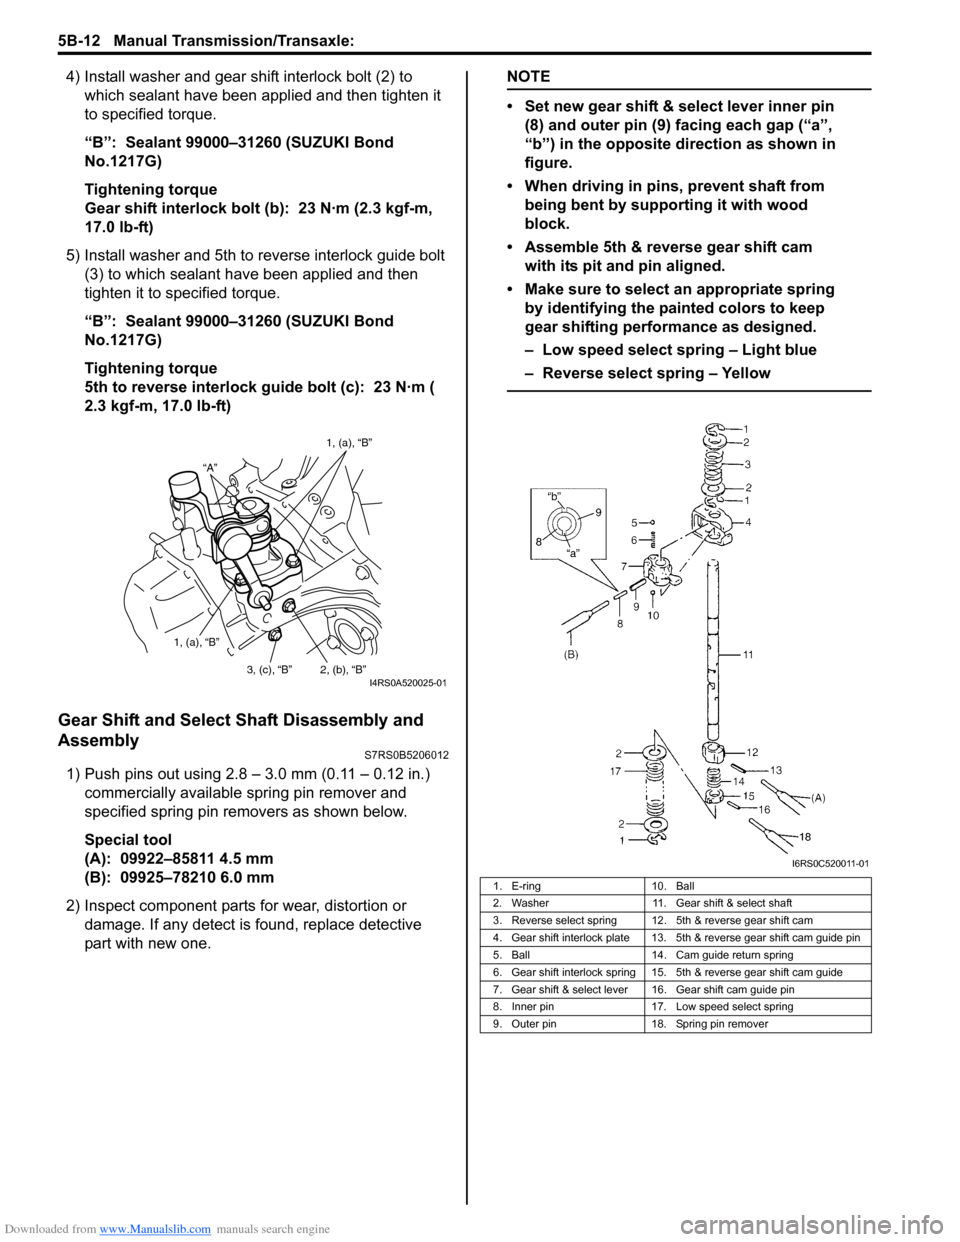 SUZUKI SWIFT 2007 2.G Service User Guide Downloaded from www.Manualslib.com manuals search engine 5B-12 Manual Transmission/Transaxle: 
4) Install washer and gear shift interlock bolt (2) to which sealant have been app lied and then tighten 